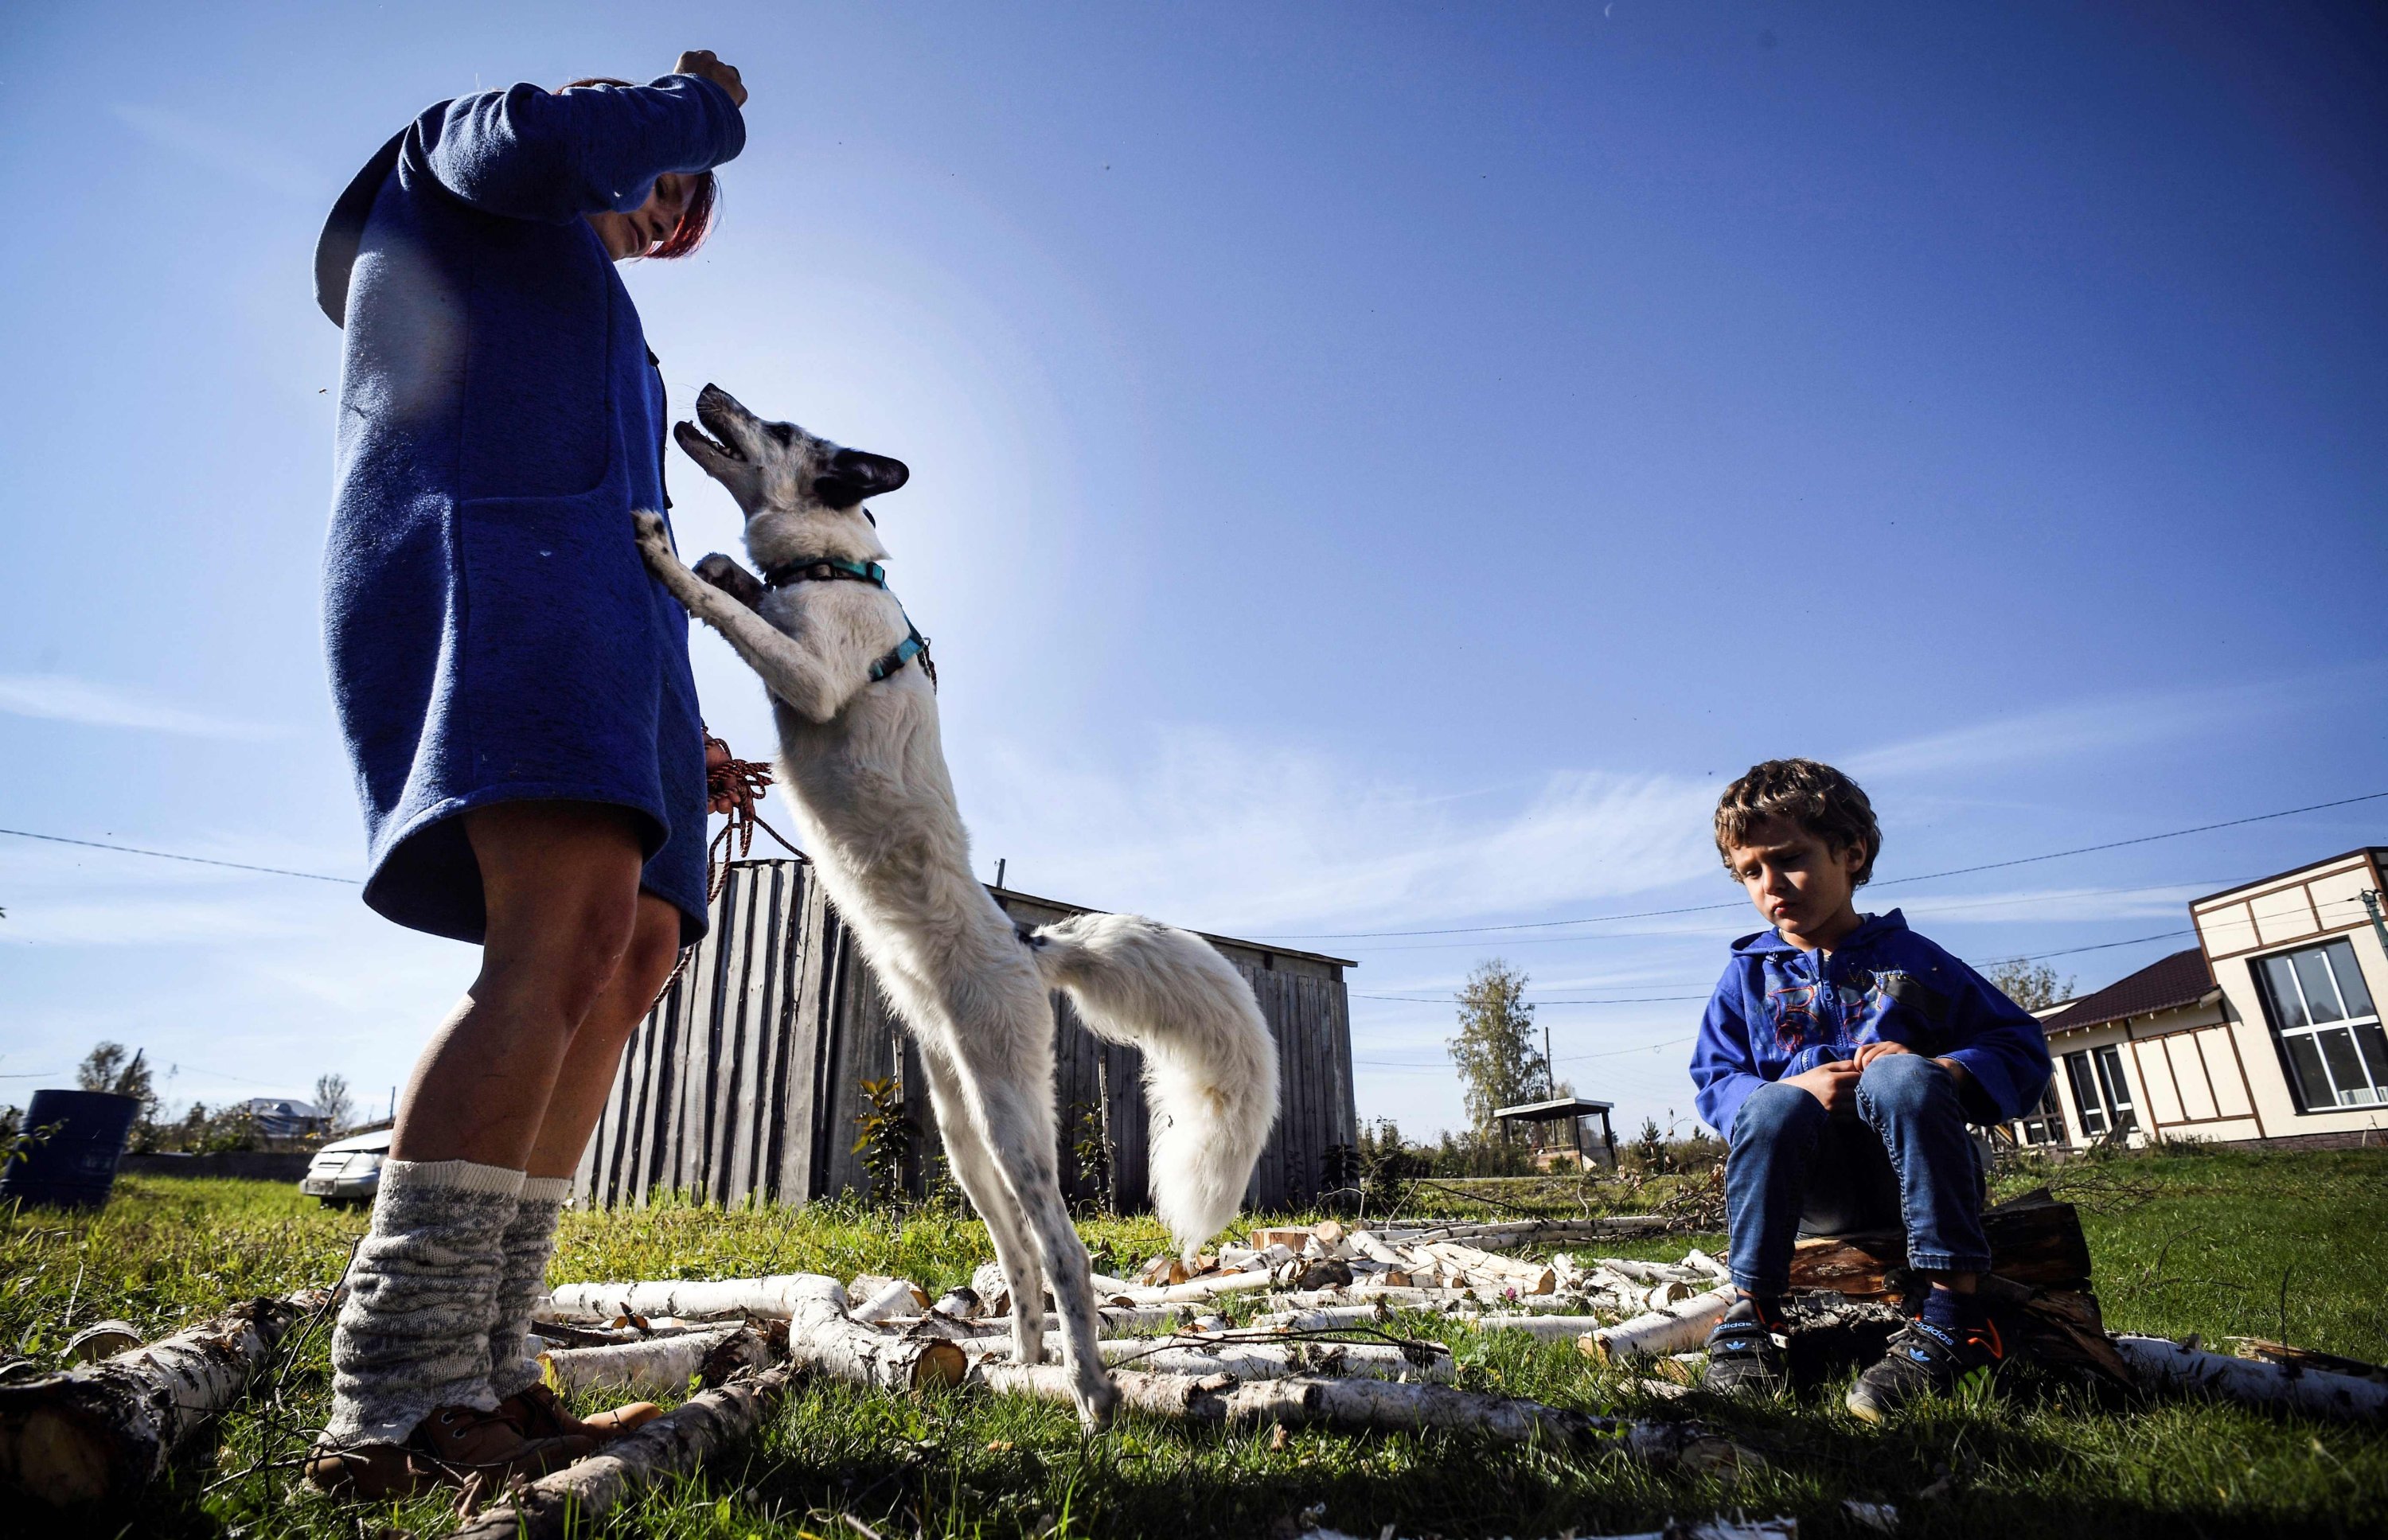 Tatyana Abramova, 33, and her son Timofei, 6, play with their pet fox Plombir at their countryside house outside the Siberian city of Novosibirsk on Sept. 12, 2020. (AFP Photo)